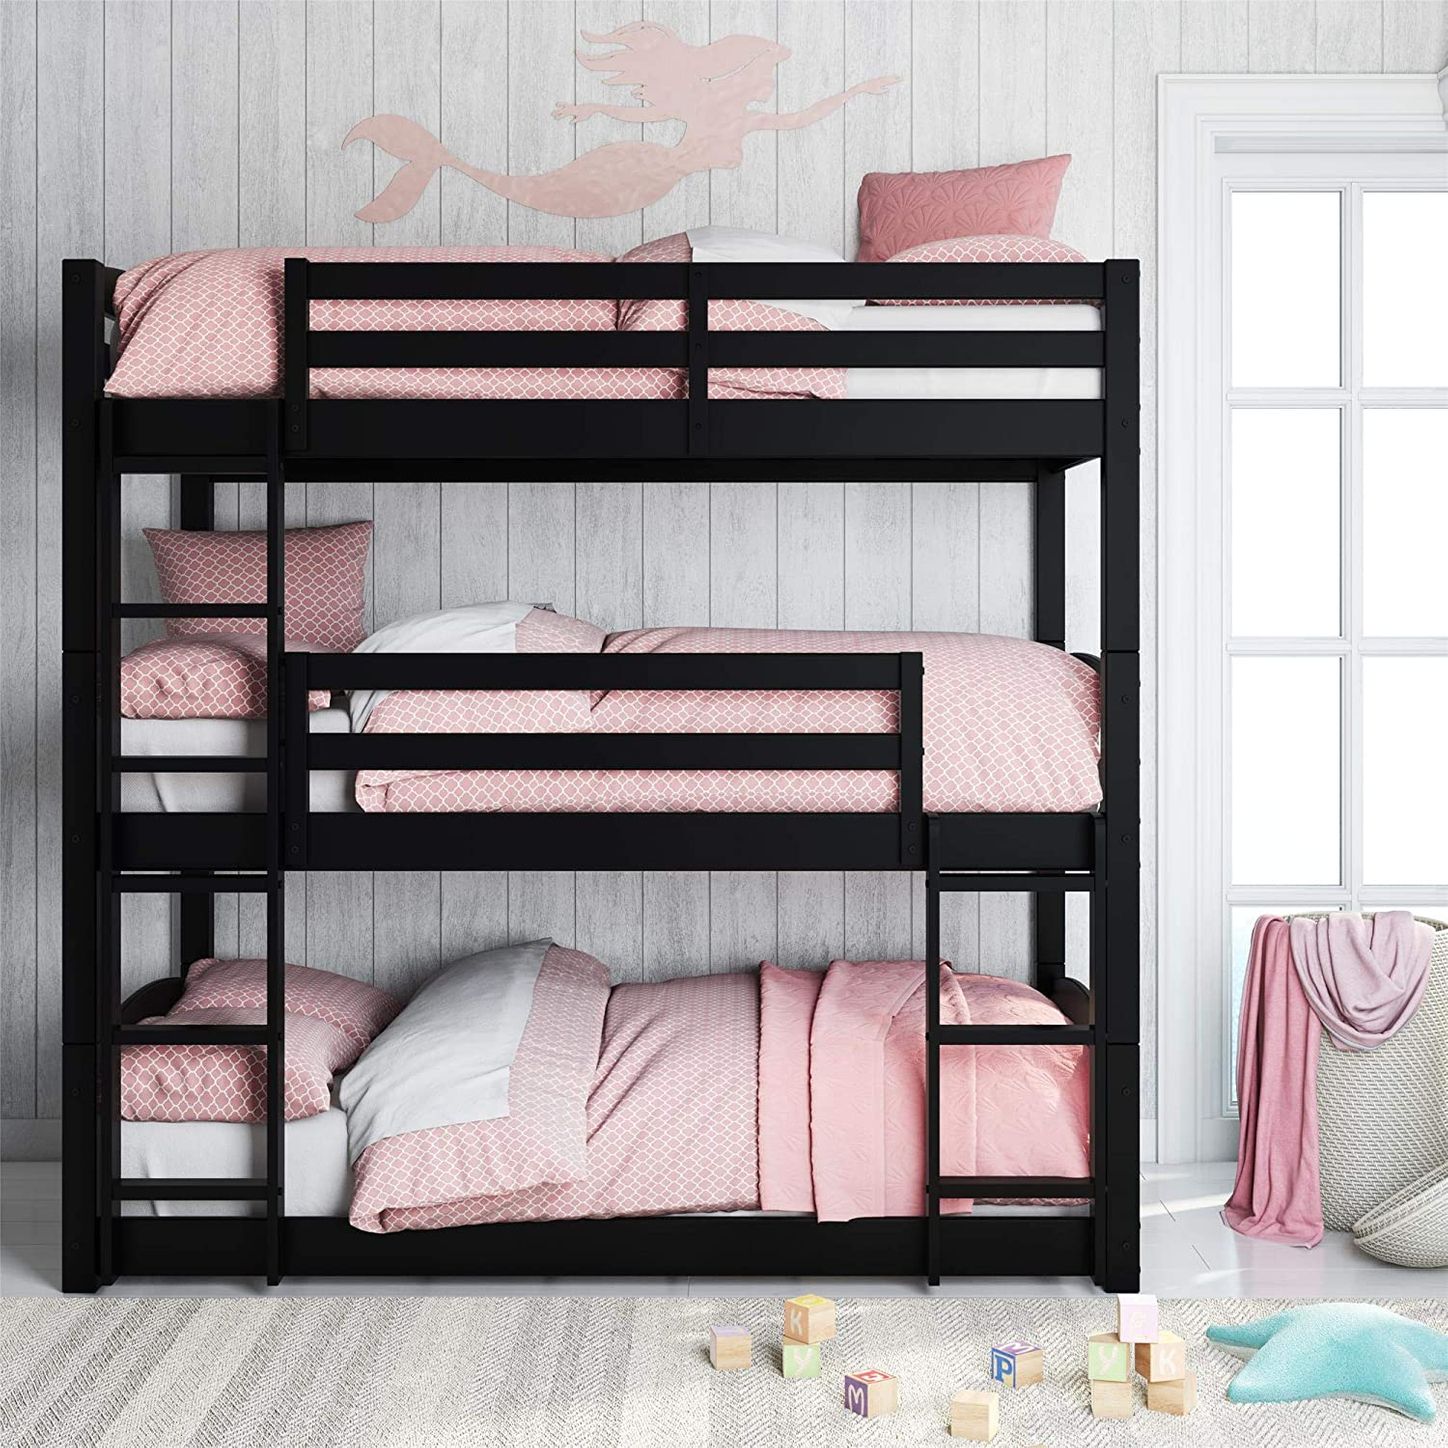 8 Best Bunk Beds 2020 The Strategist, Rooms To Go Bunk Beds With Desk